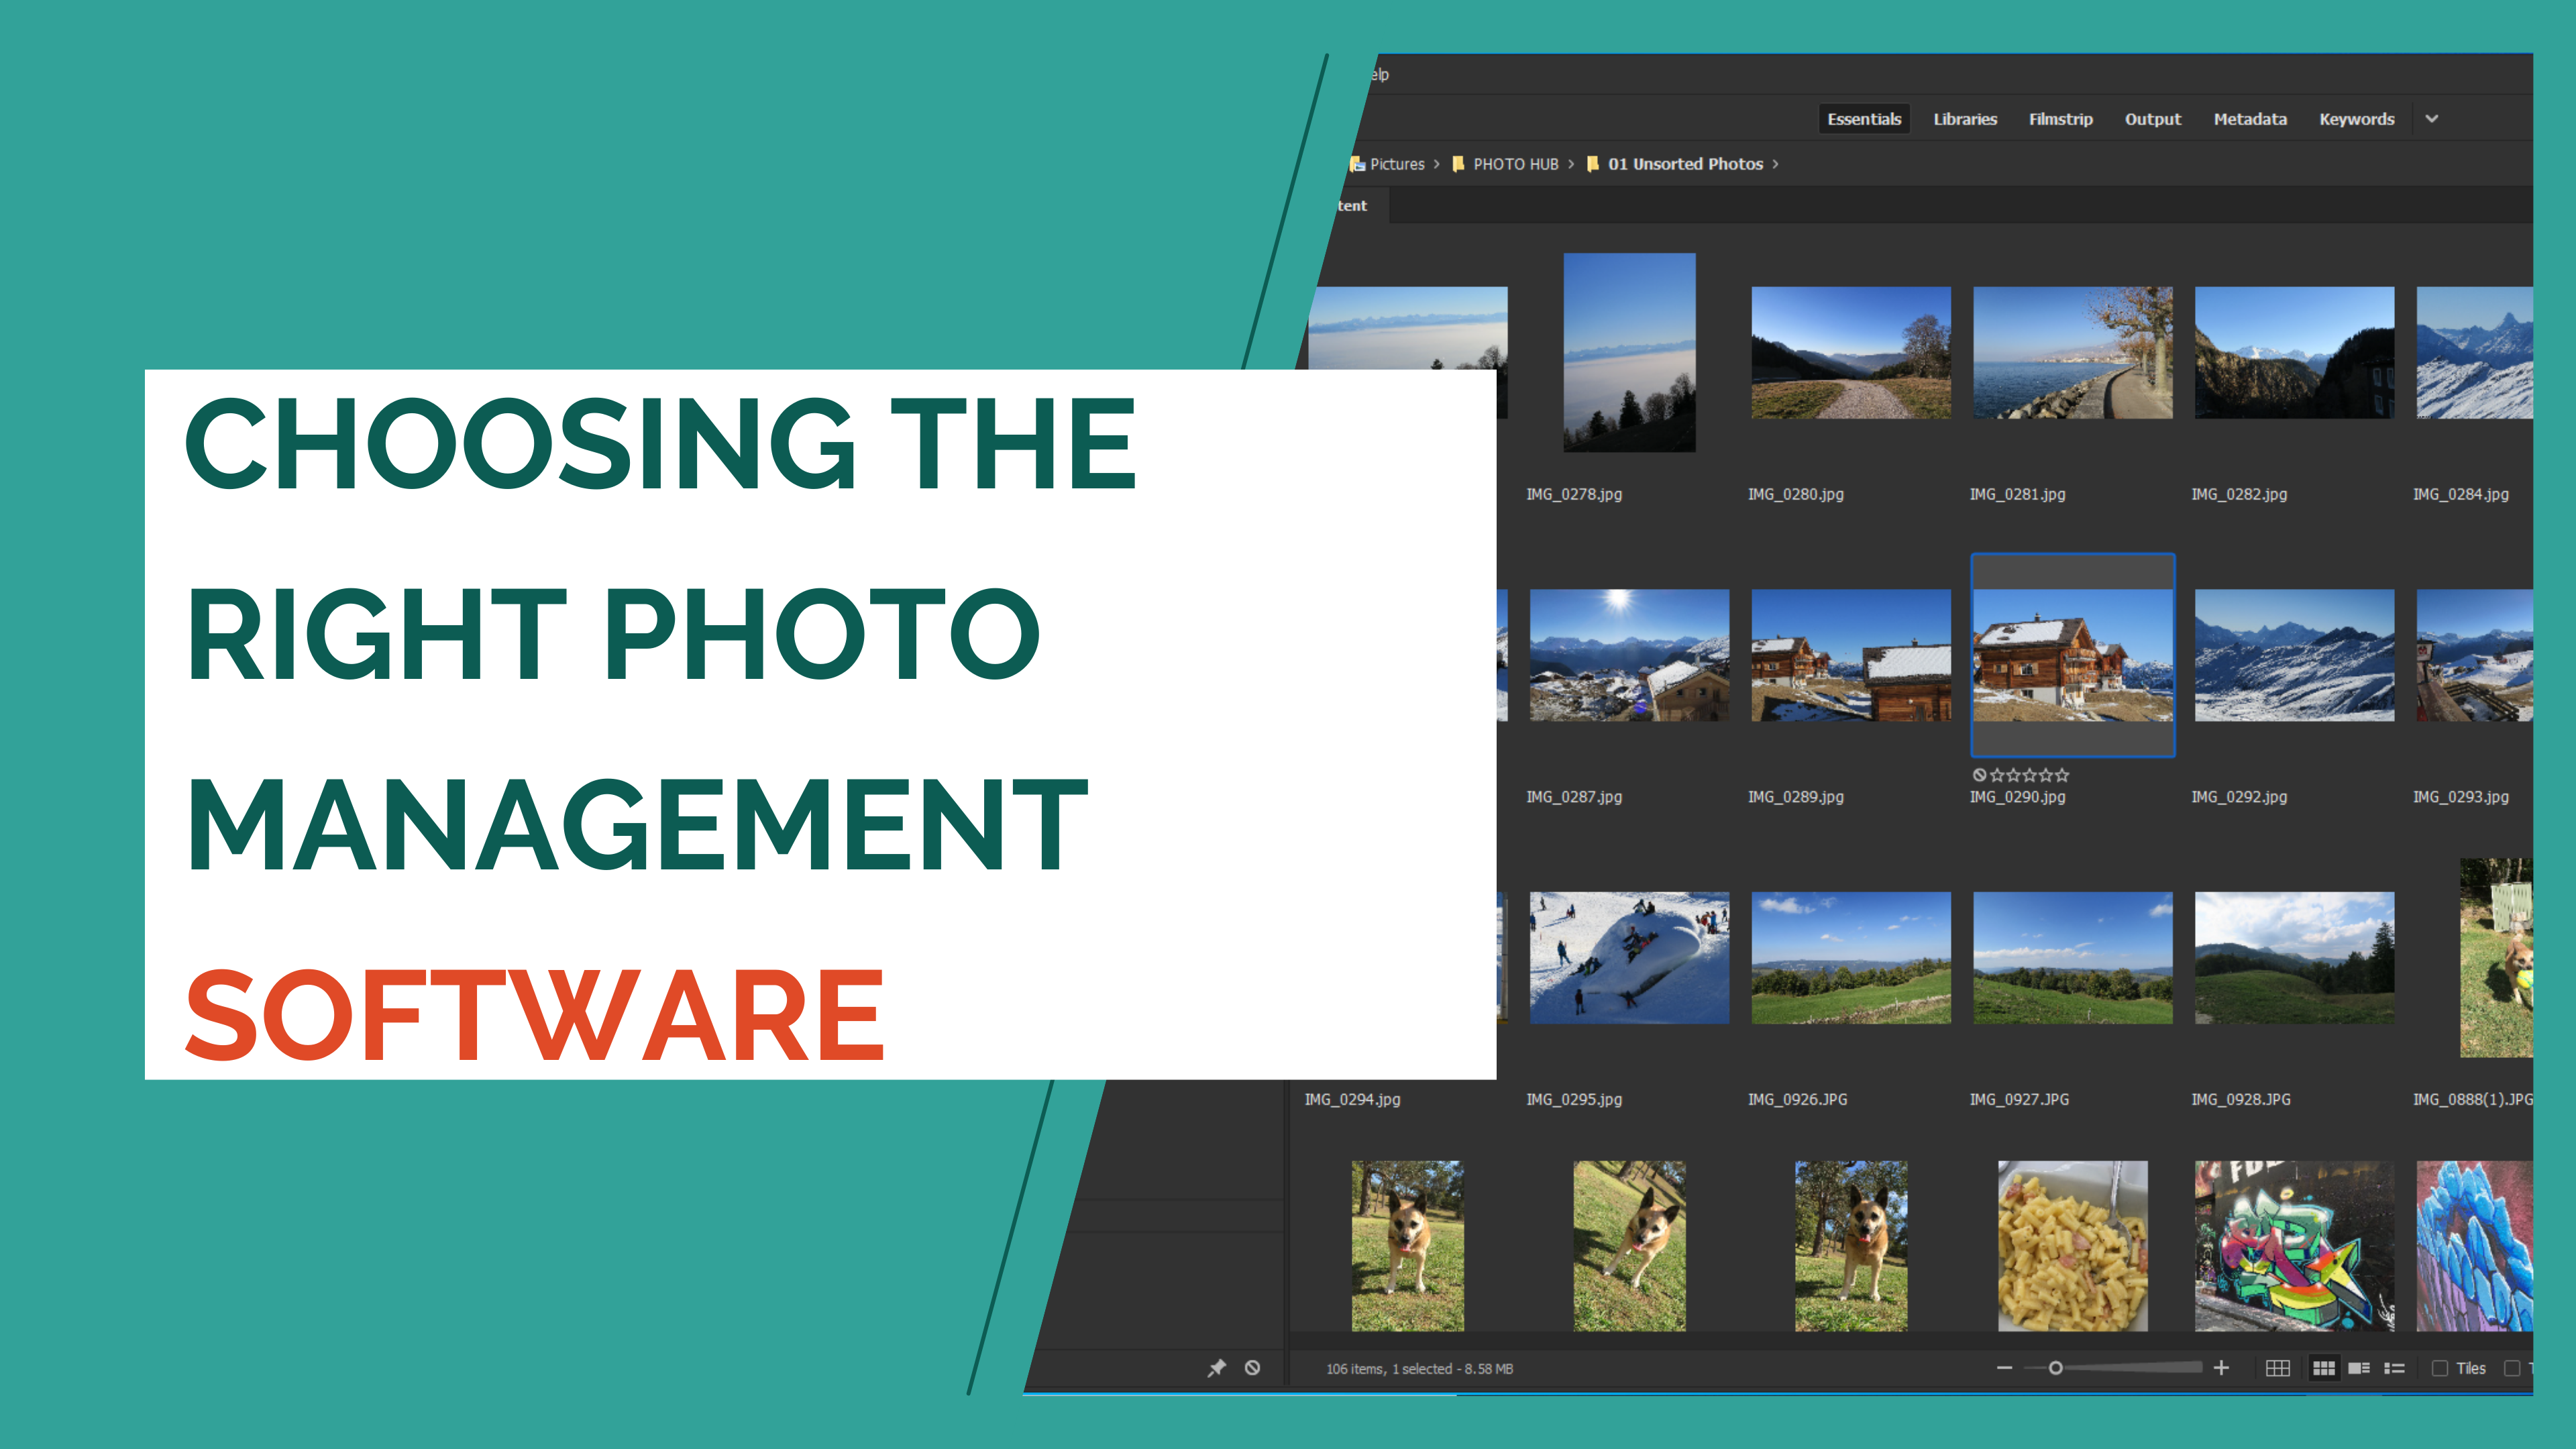 Choosing the right photo management software